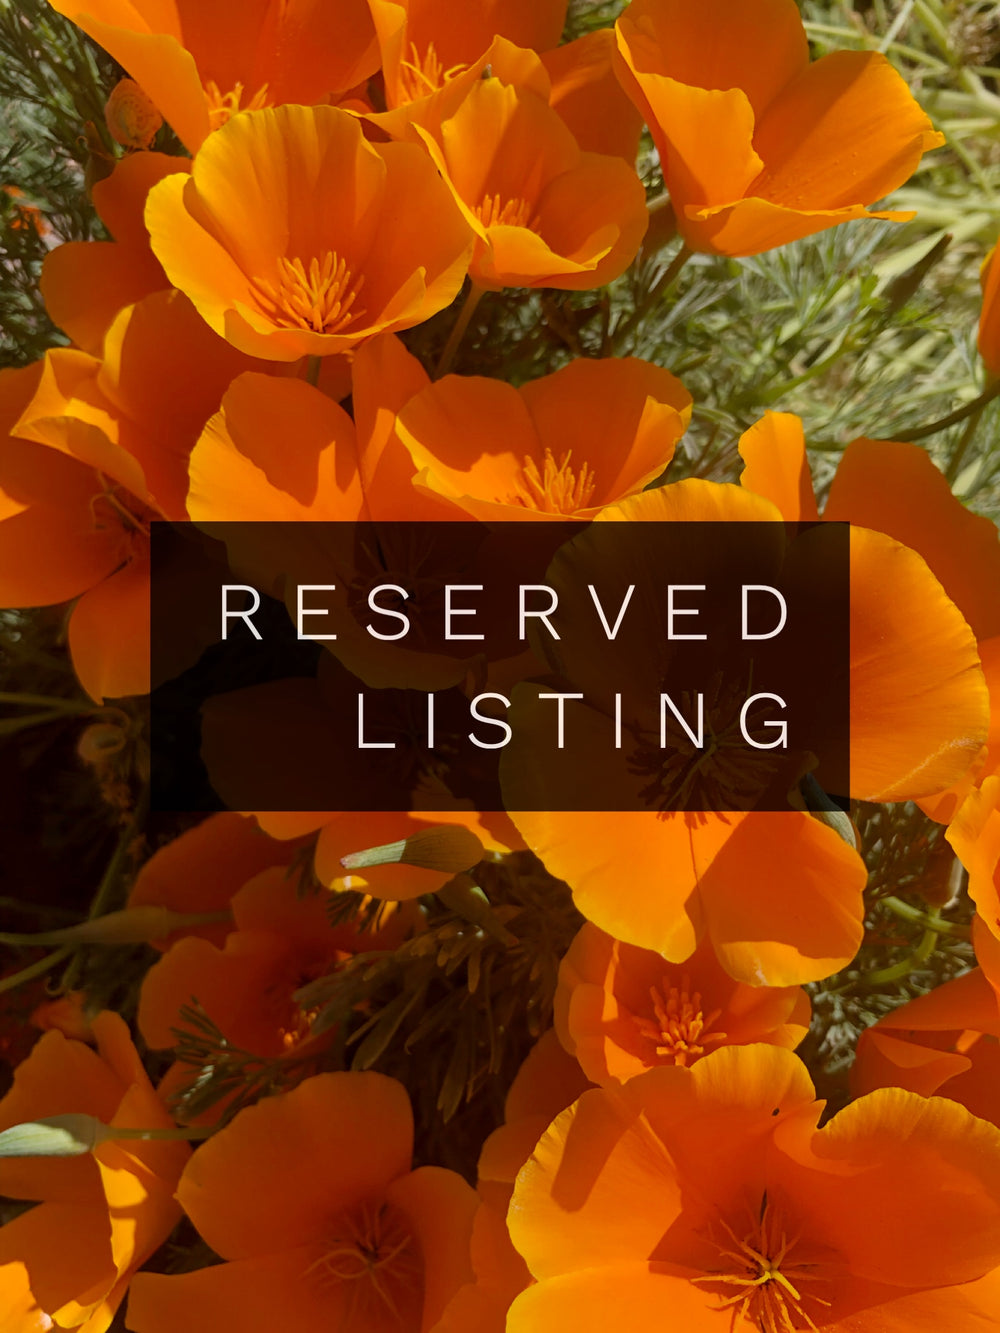 RESERVED LISTING - _.enchanted_designs._